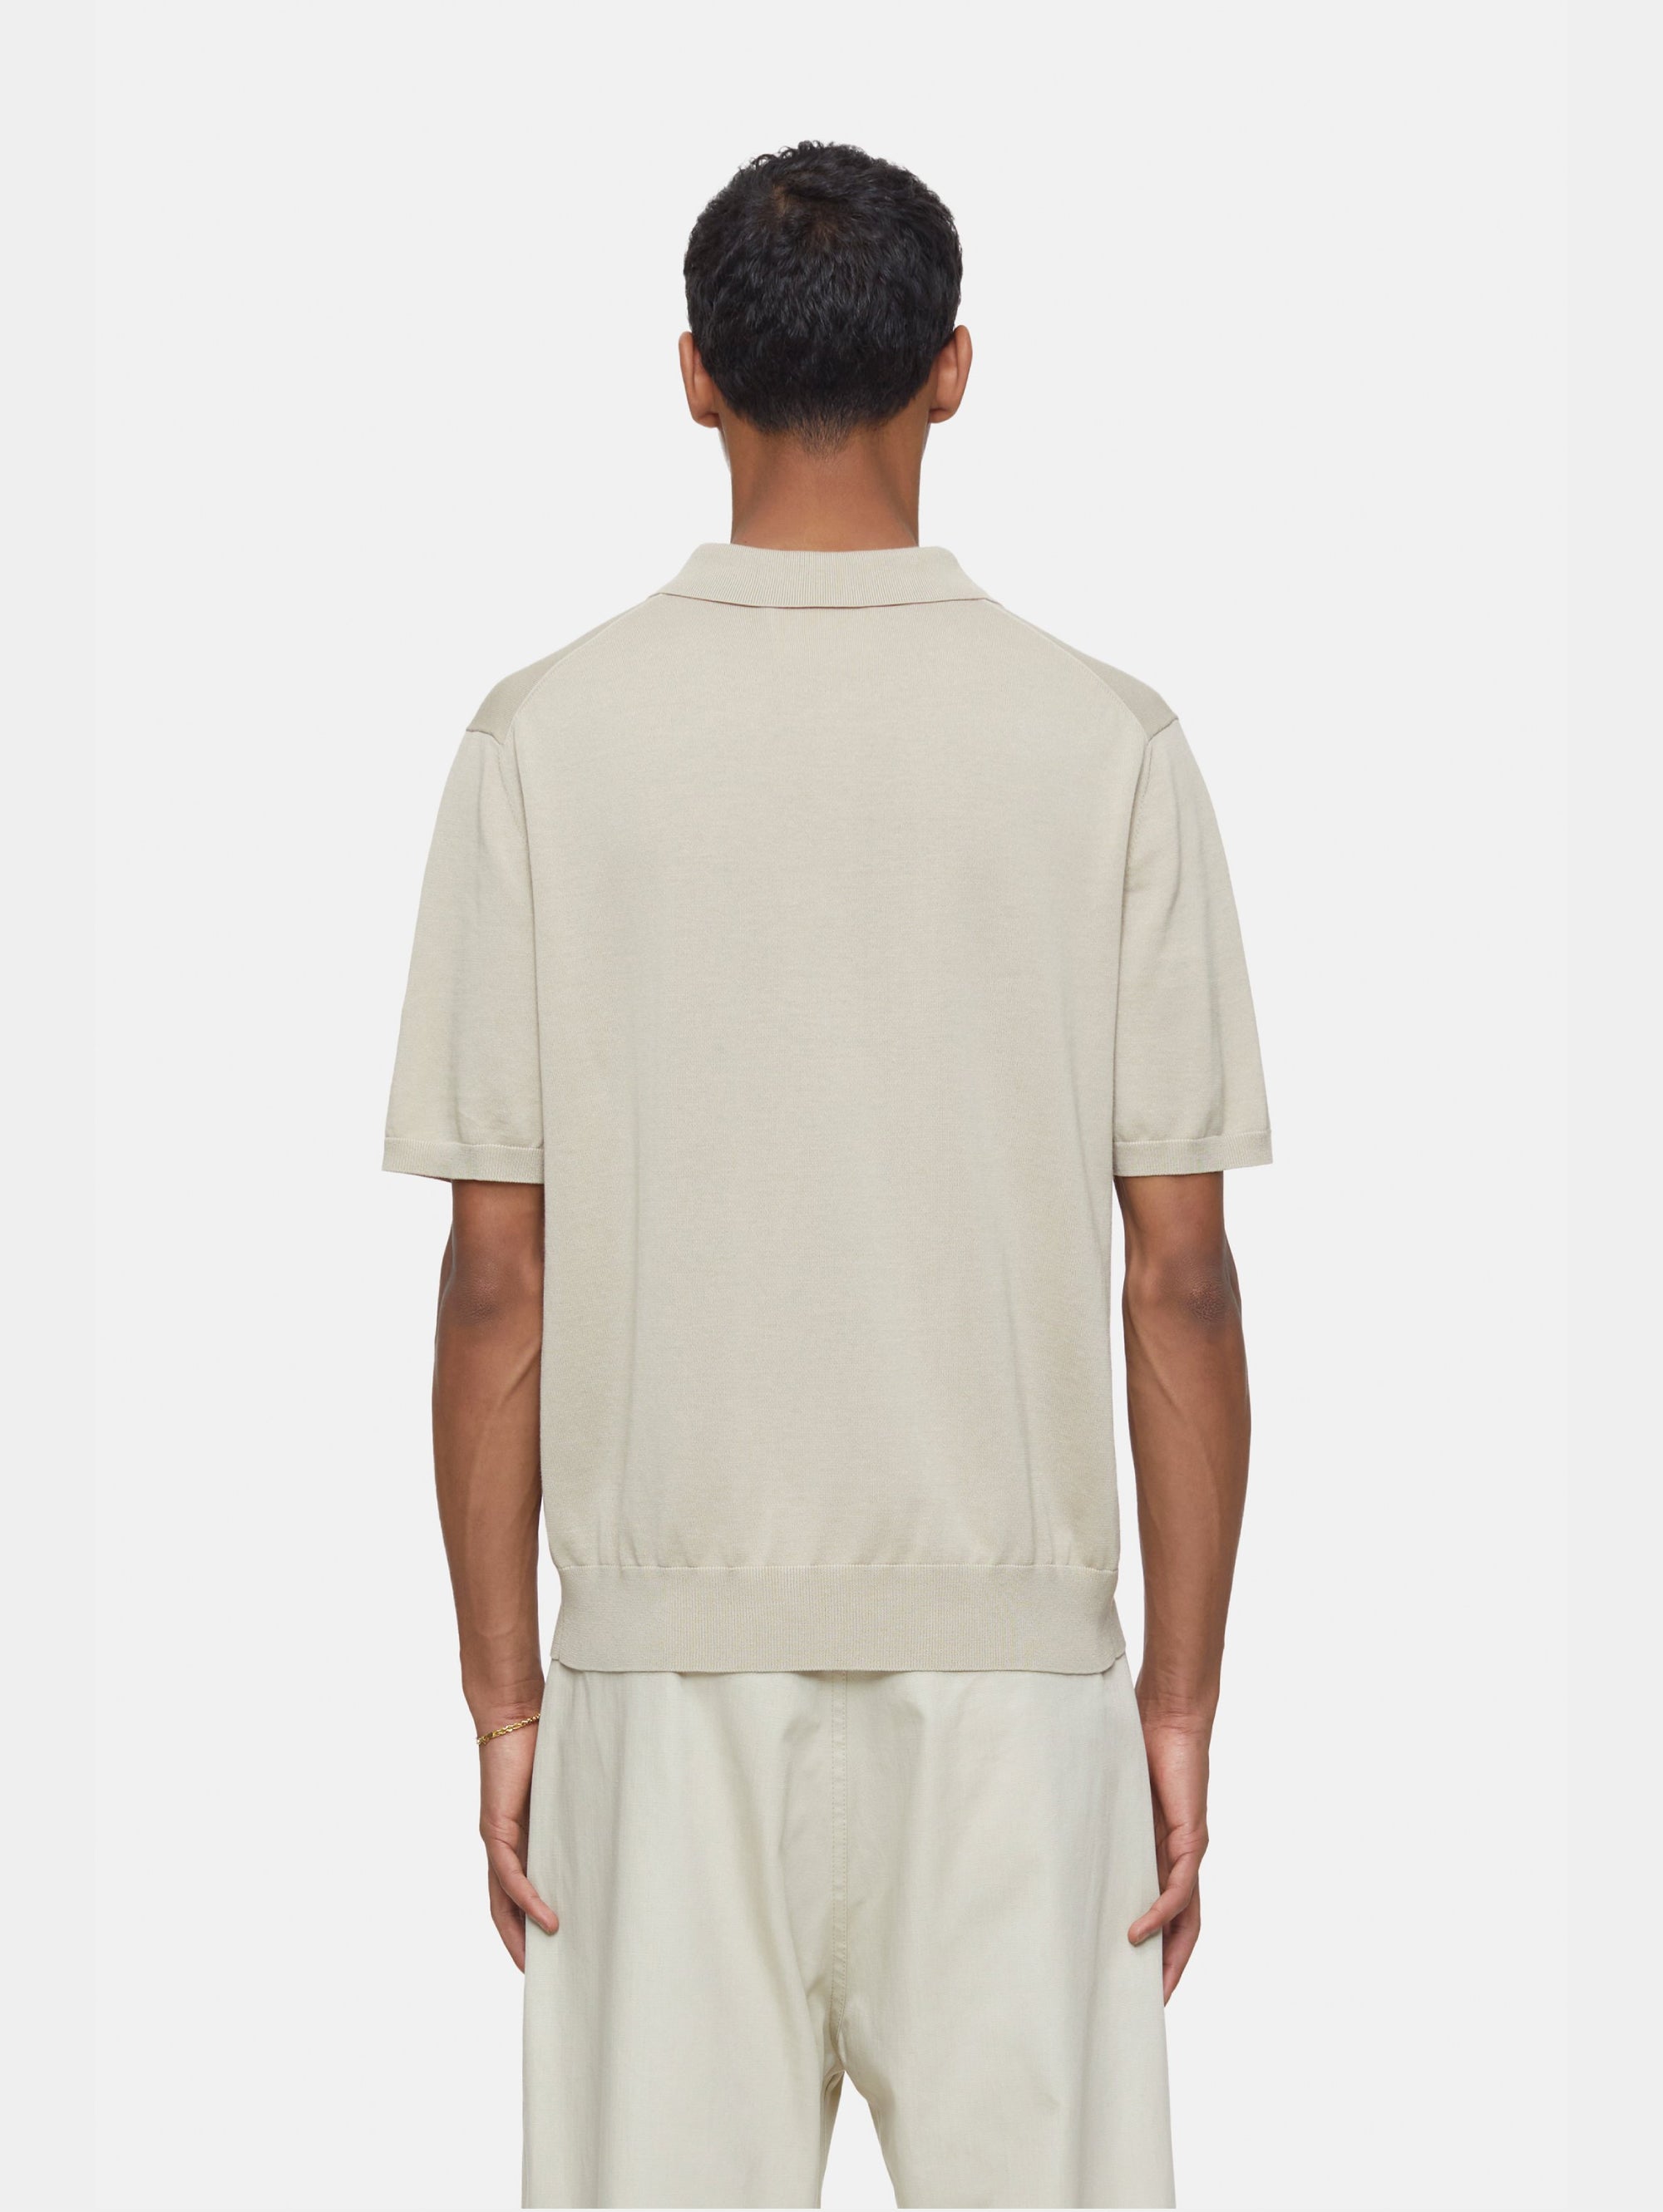 Polo shirt in Extrafine Sand Cotton